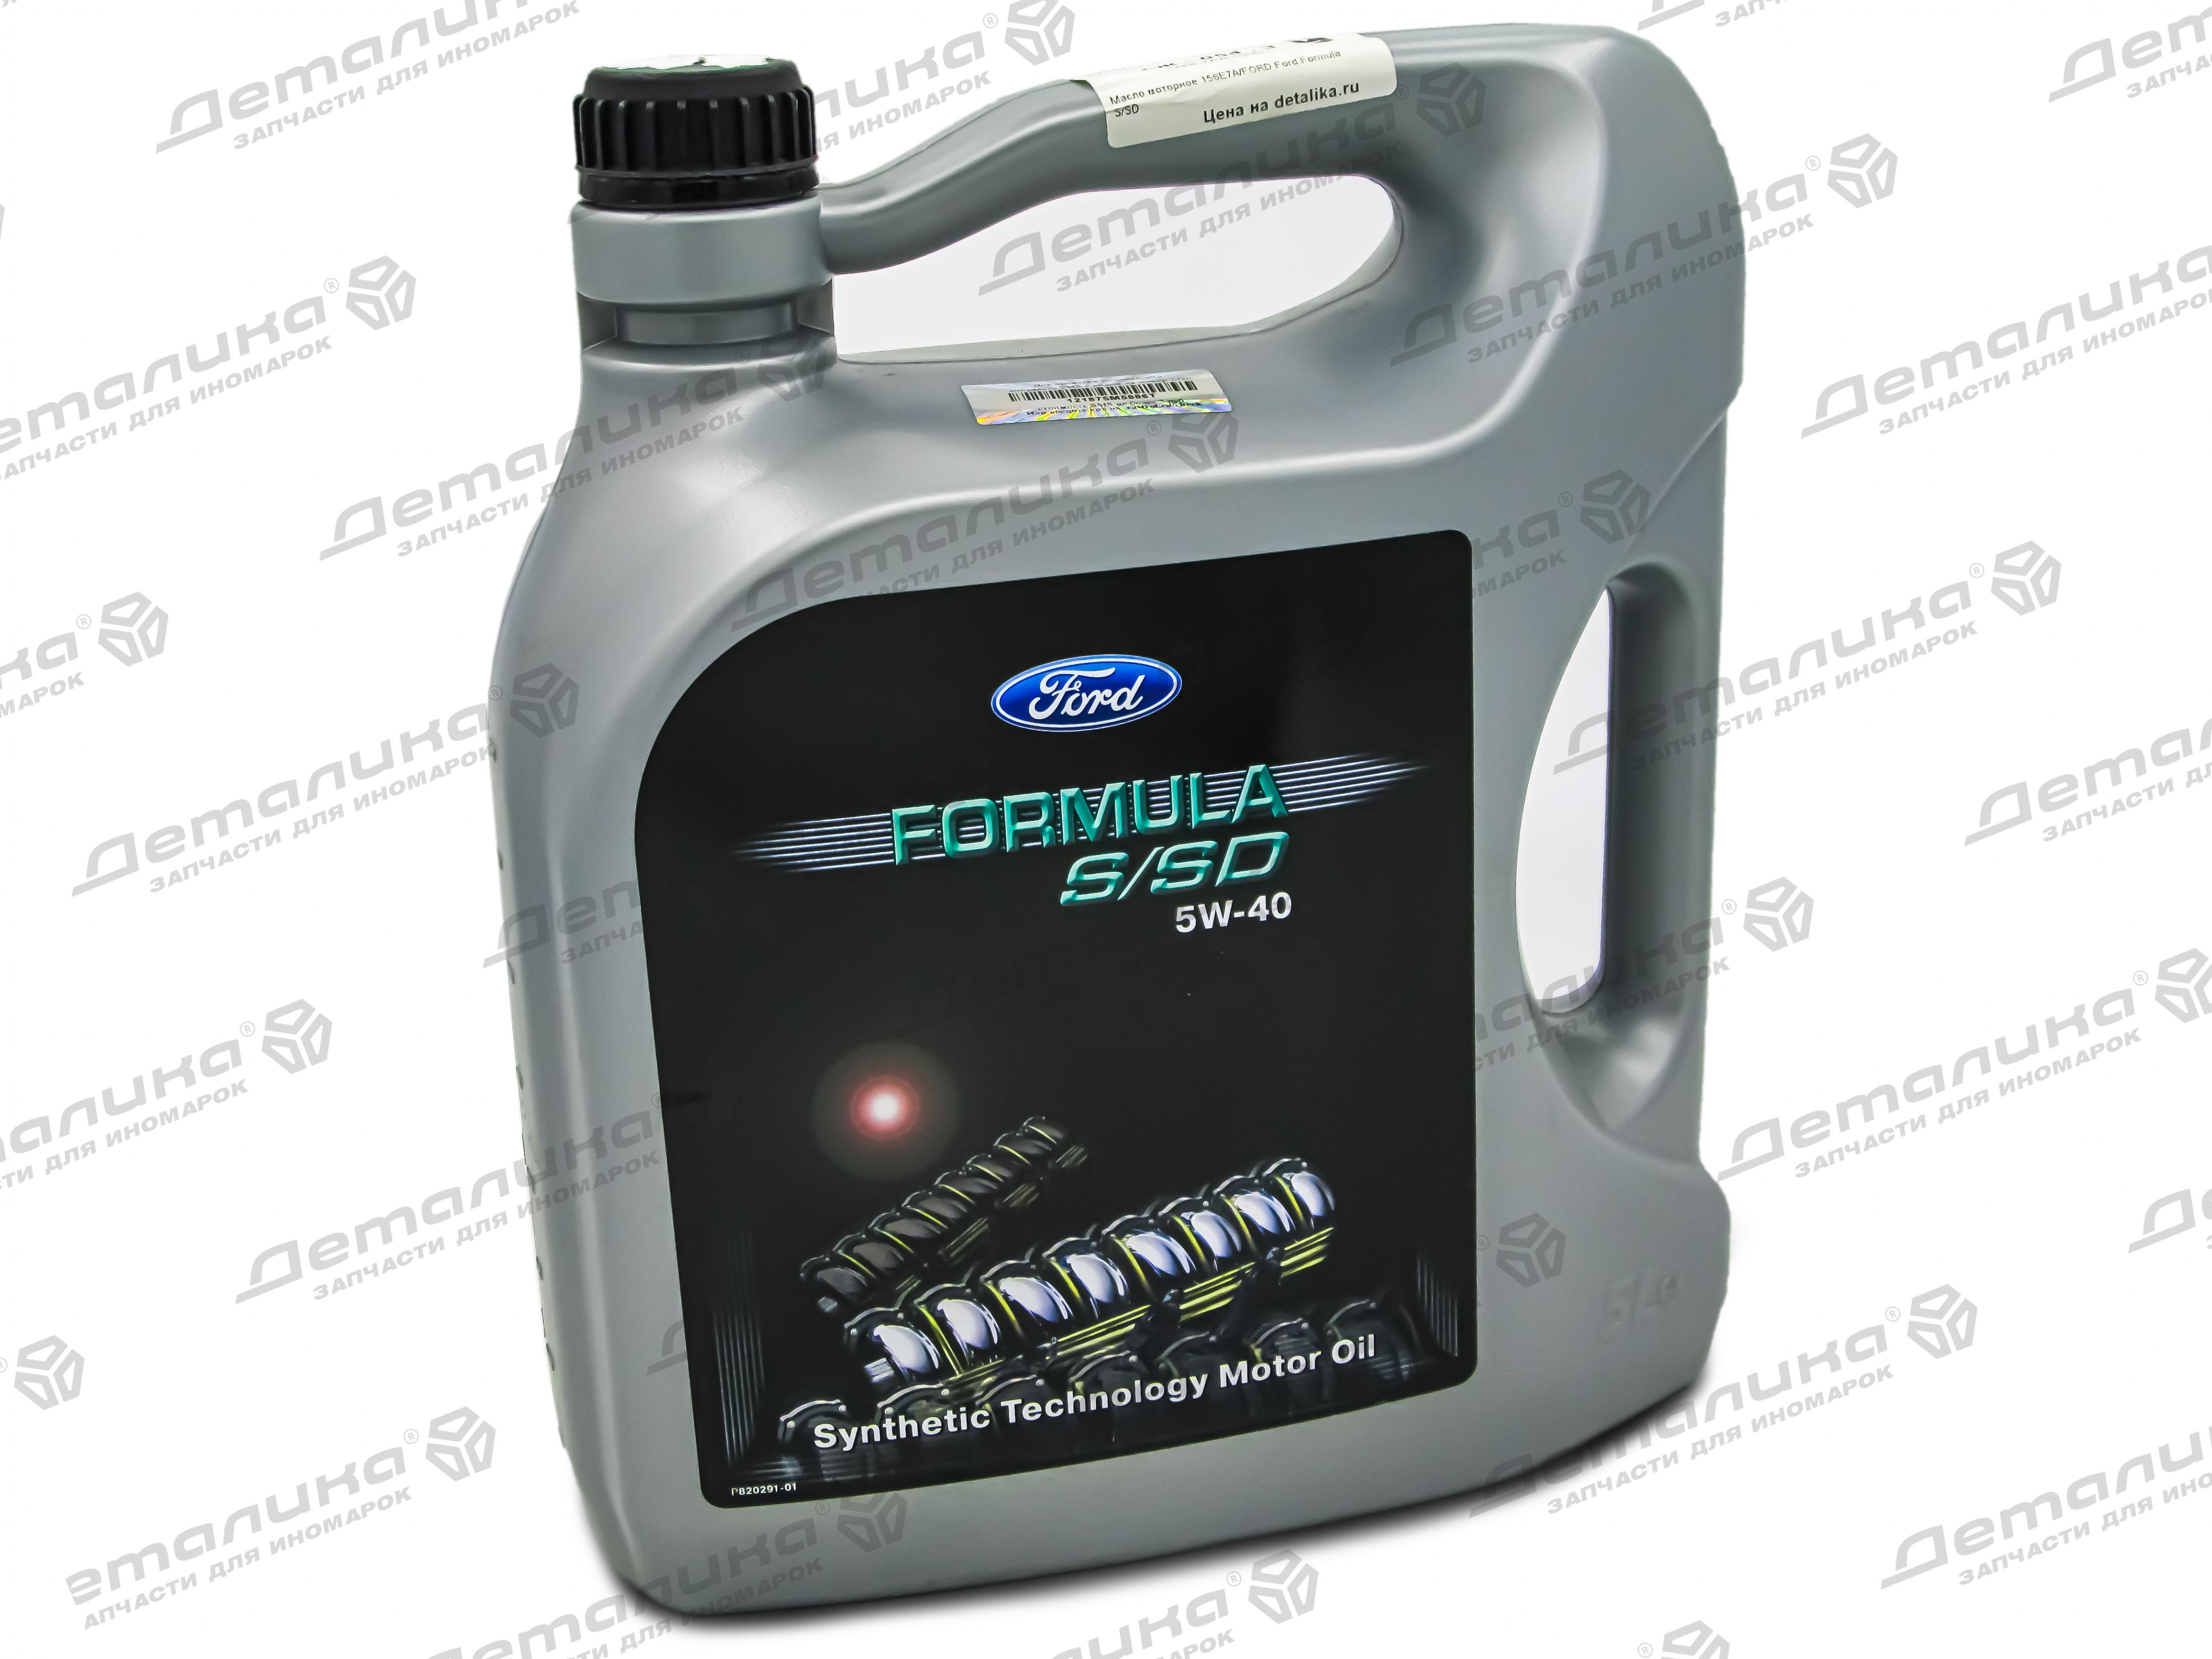 Масло для дизеля транзит. Ford Formula s/SD 5w40. Ford Oil 156e7a. Масло Ford Formula 5w40 s/SD 5л синт. 156e7a Ford масло моторное Formula s/SD 5w40 5л.